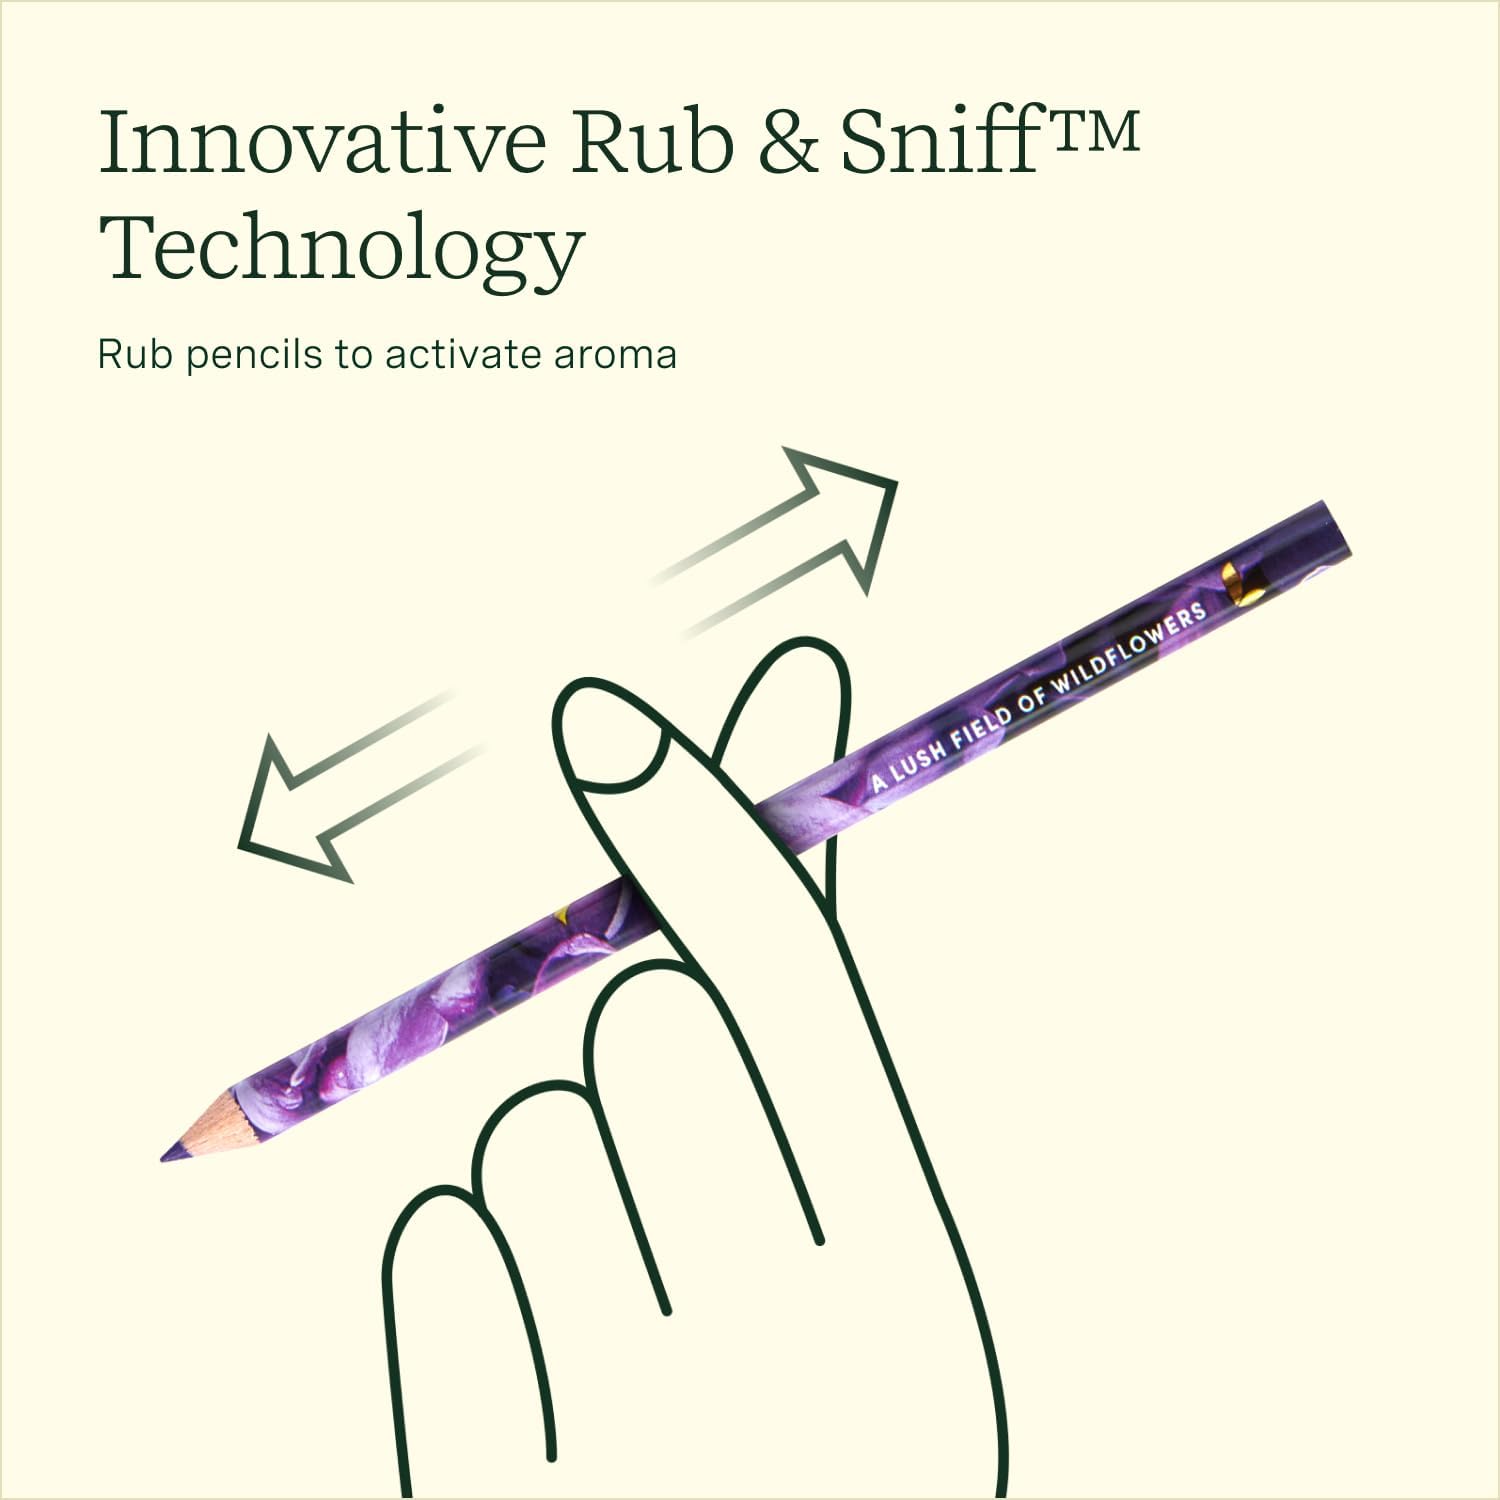 Rub & Sniff Scented Colored Pencils  Lifelines   